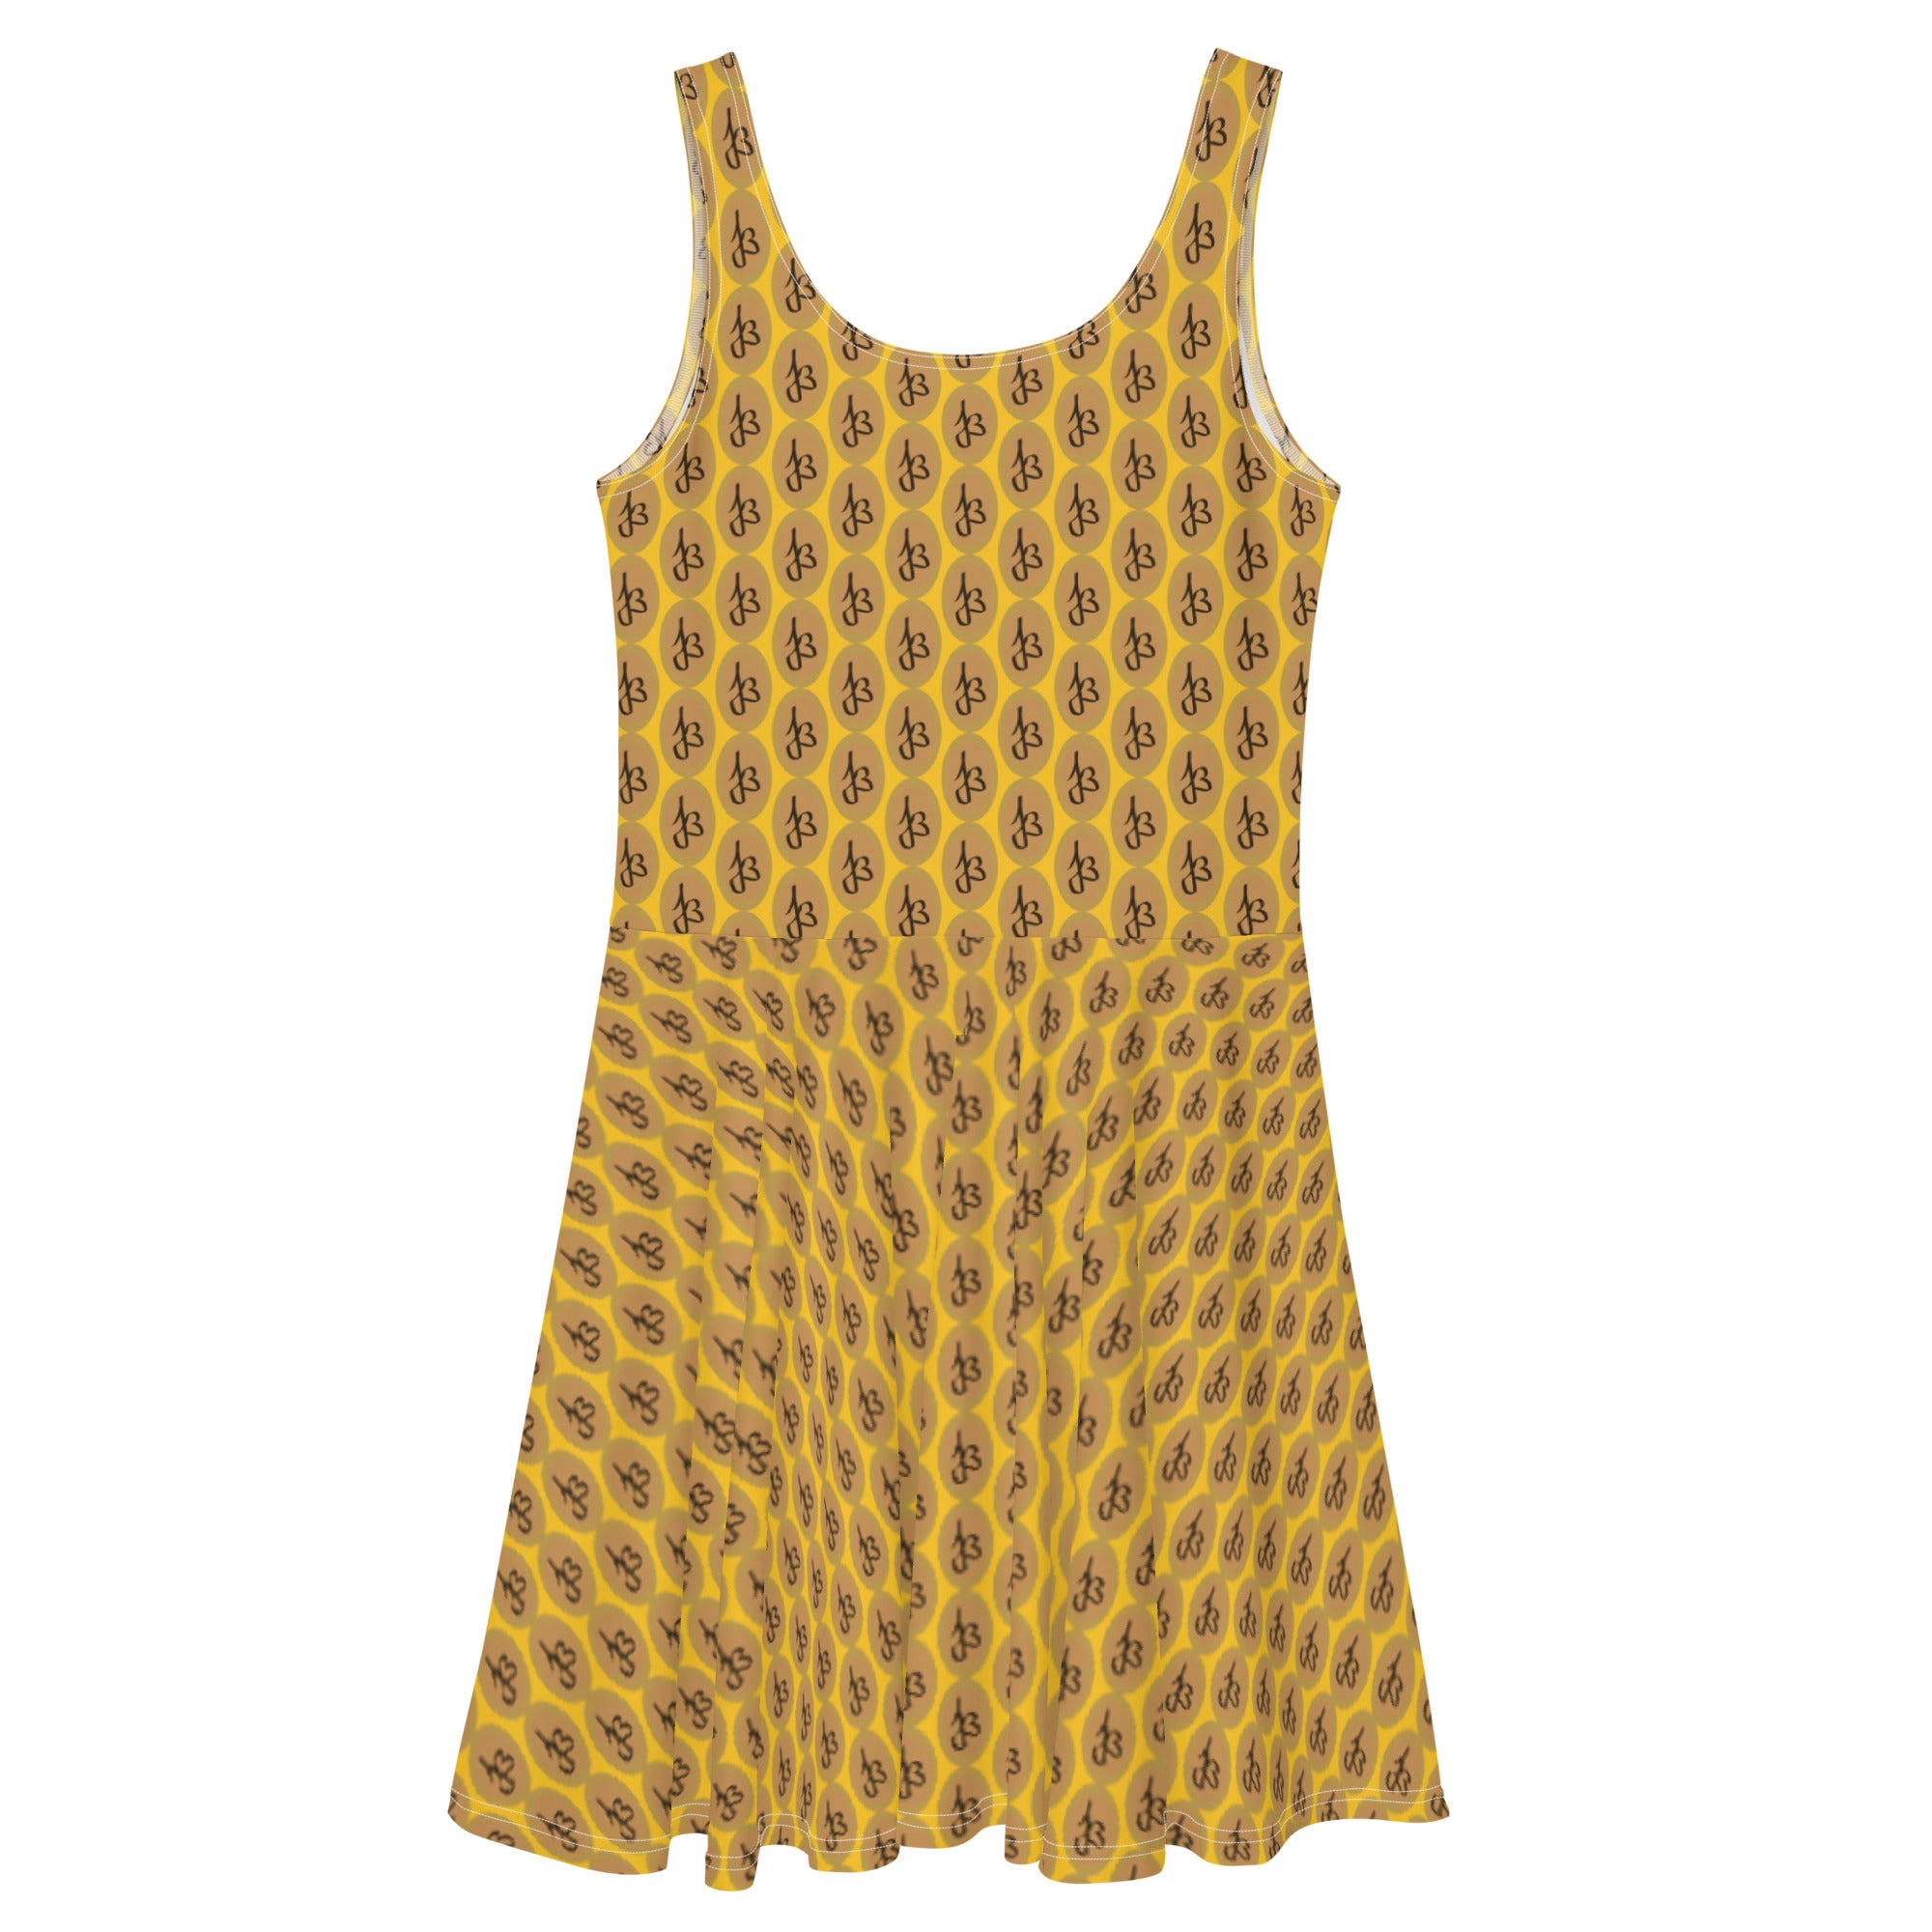 Skater Dress AJBeneficial Print on Yellow